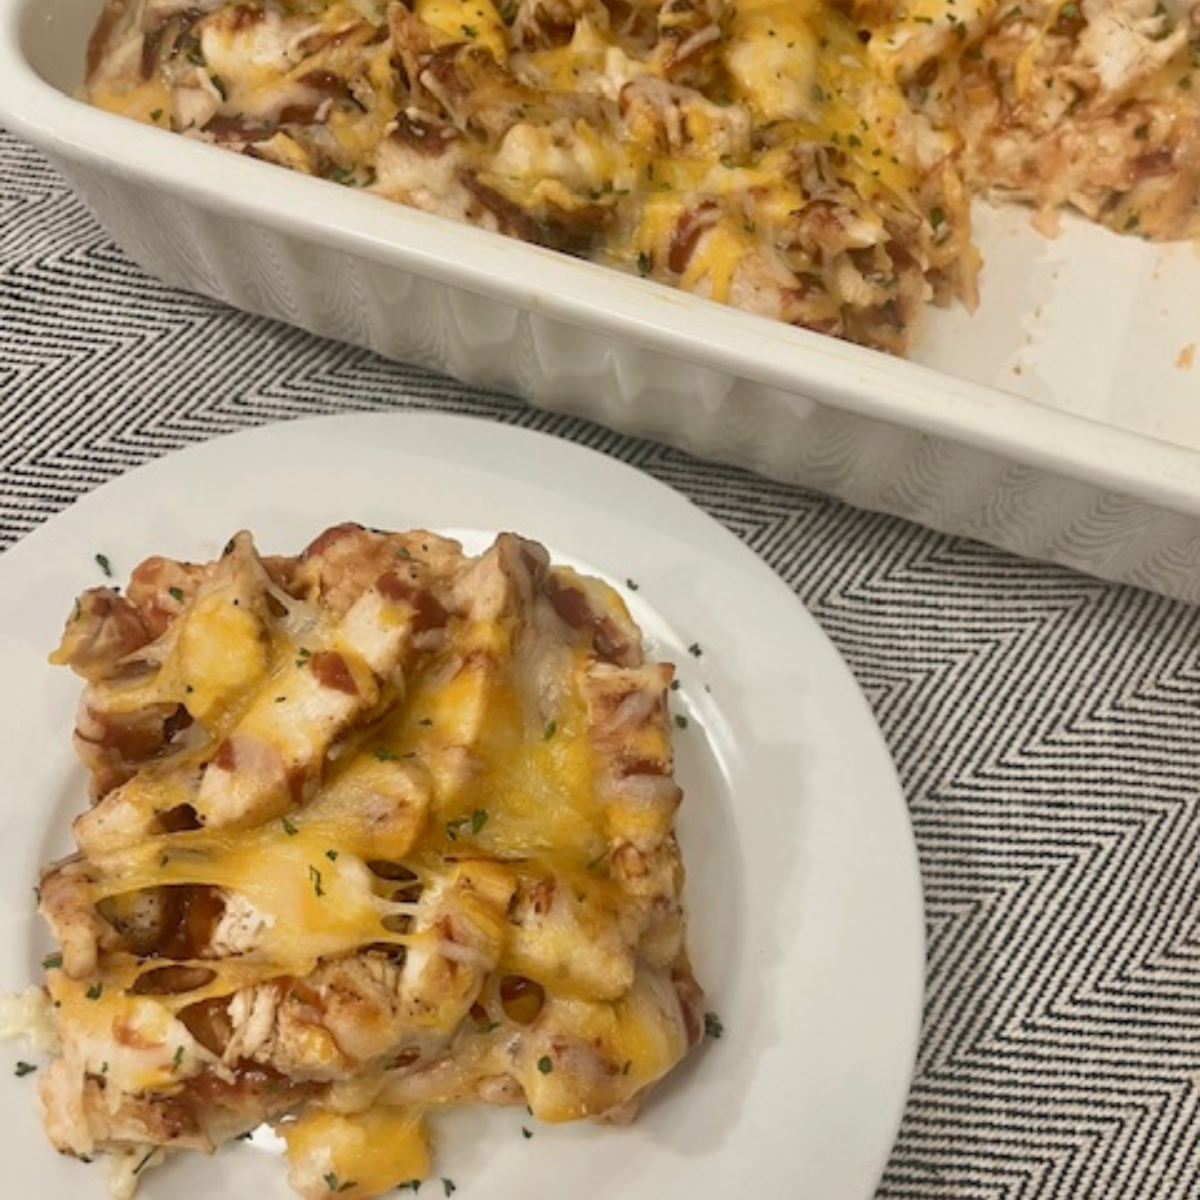 Overhead image of BBQ Chicken and Rice Casserole in a baking dish with a serving on a plate next to it